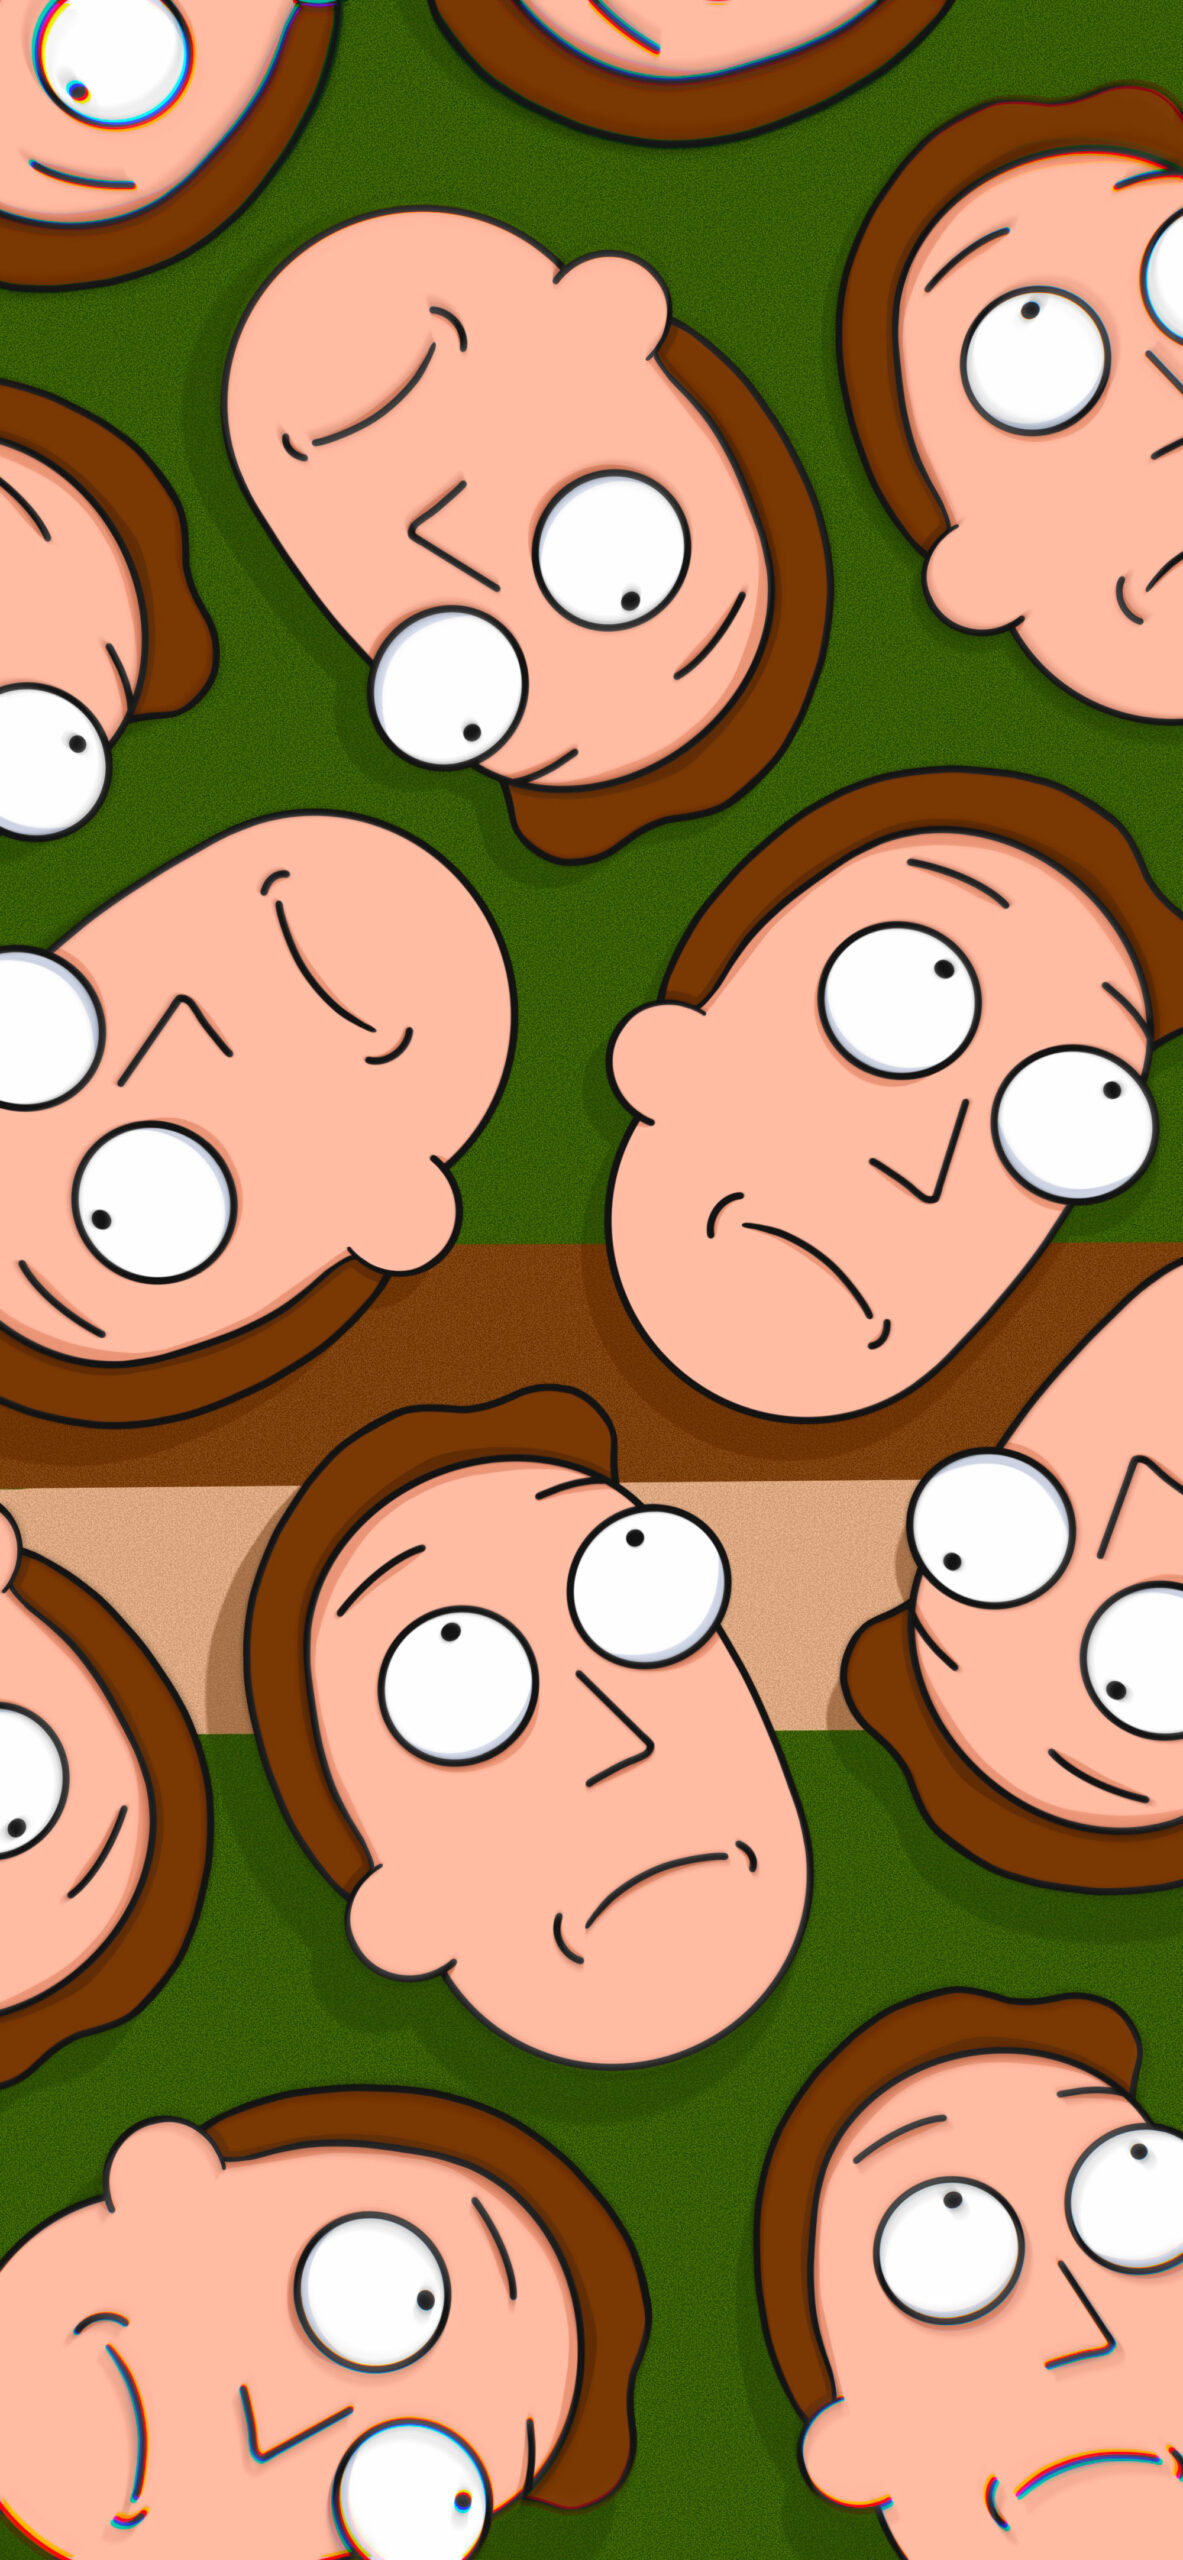 Rick and Morty Jerry Smith Green Wallpapers - Rick and Morty Wallpapers